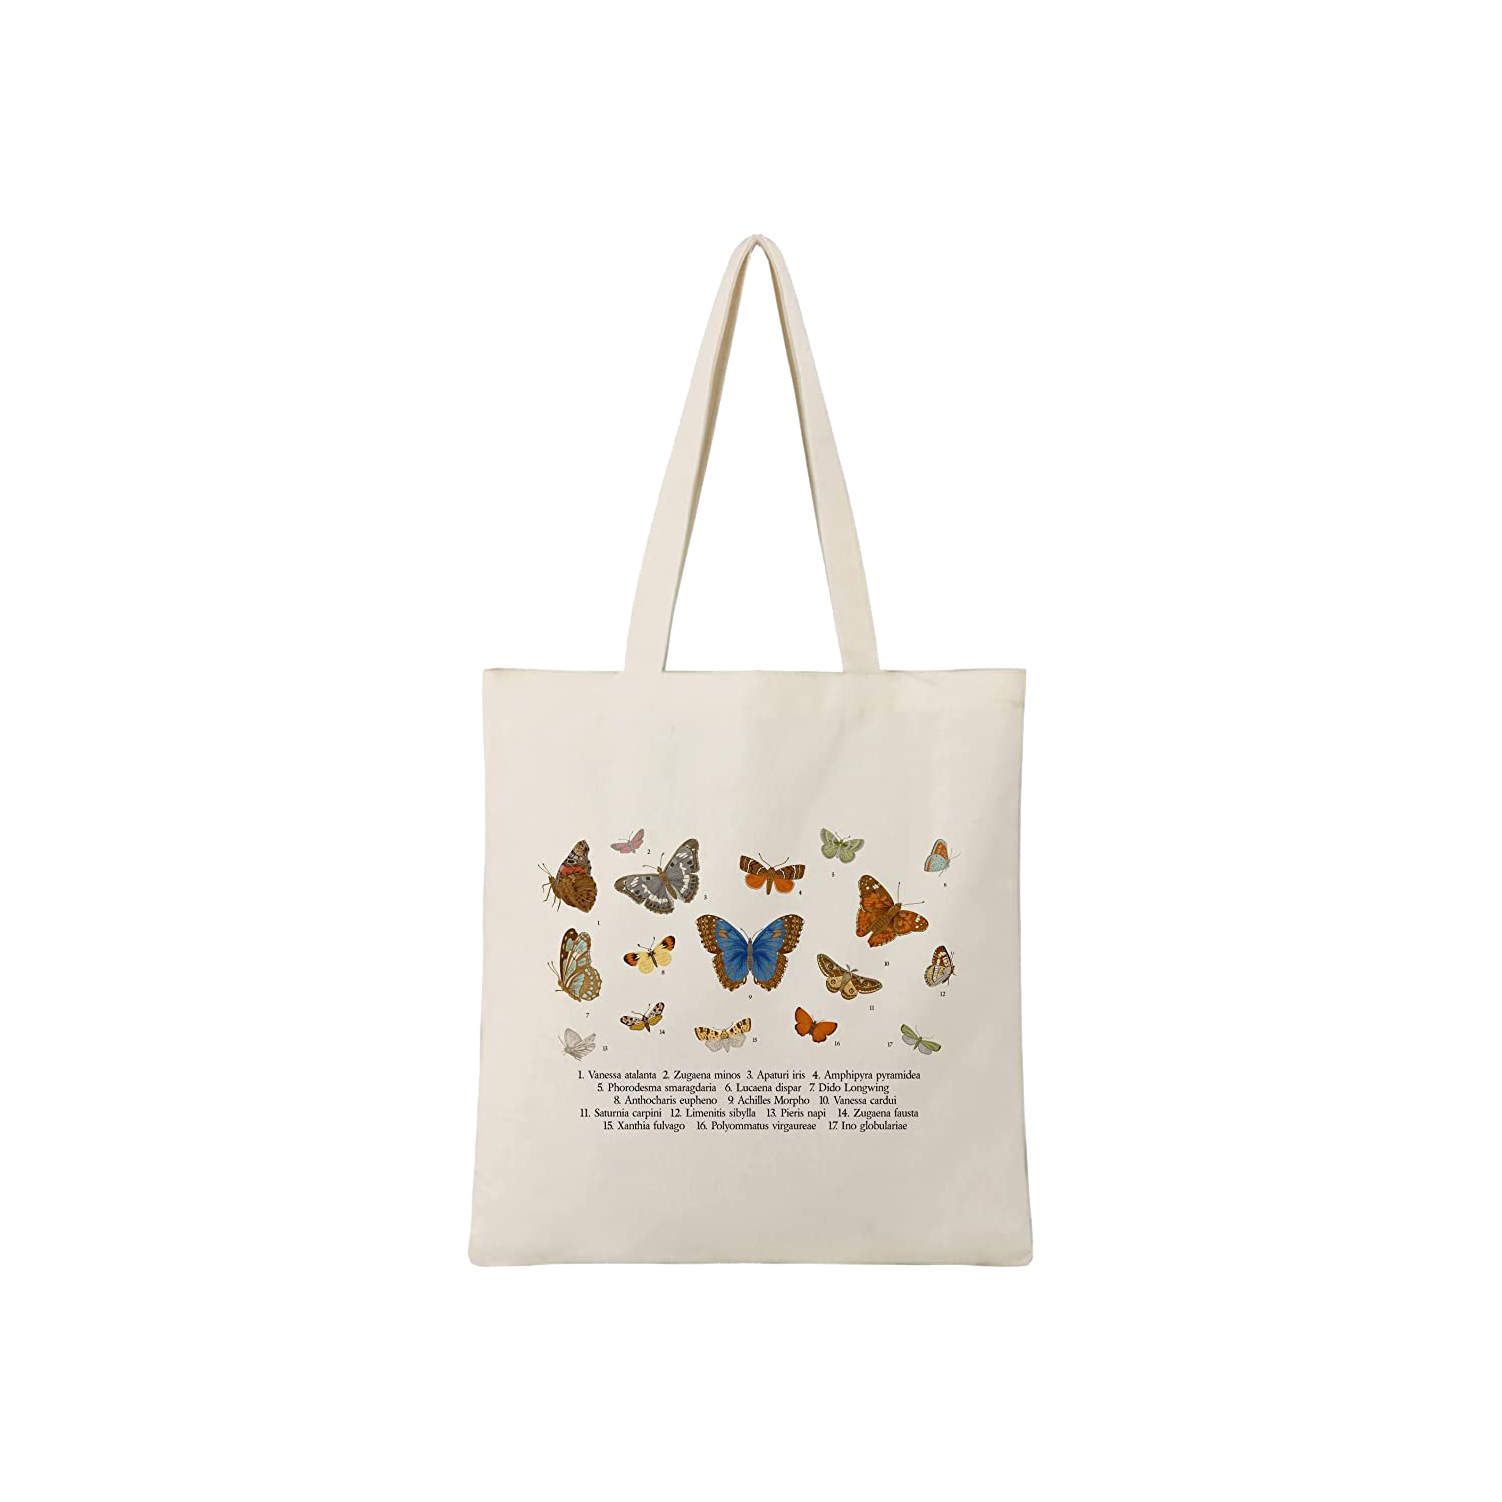 Cute Washable Canvas Tote Bag with Inner Pockets: Gift Idea For